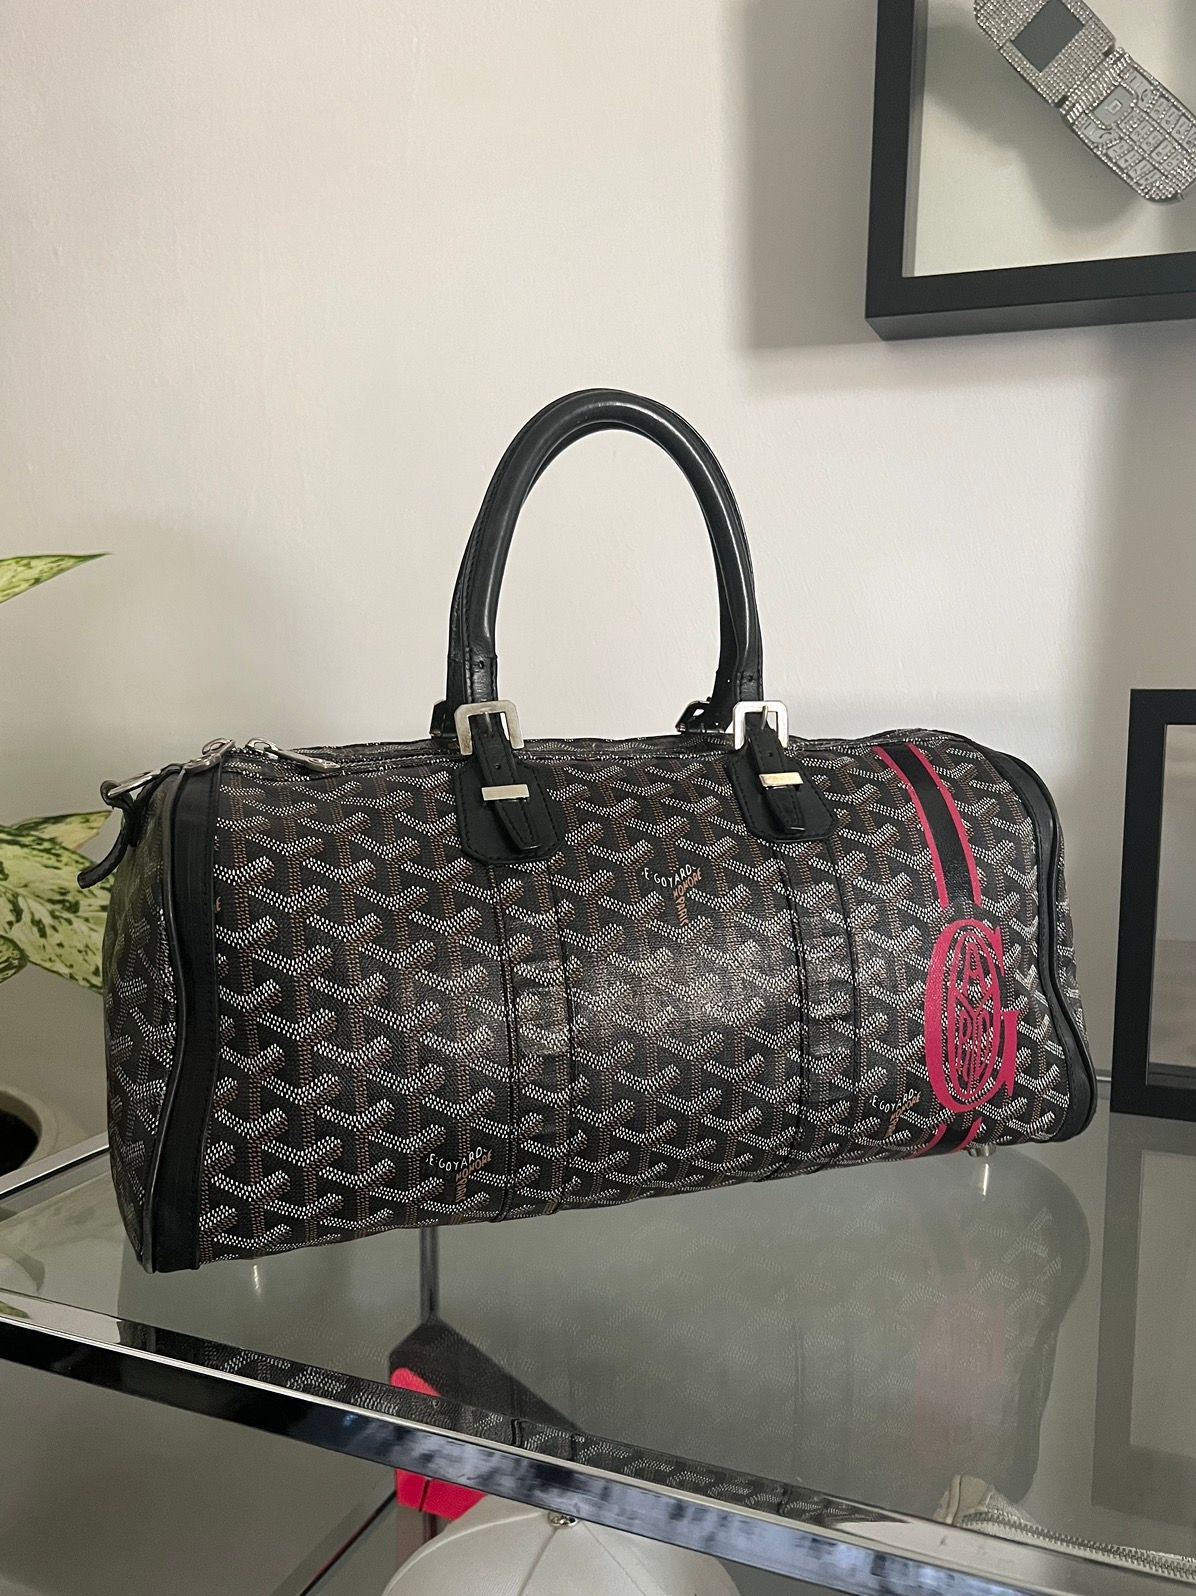 Goyard Hotel Du Parc Red Duffle Bag Extendable Travel Carry On Luggage  Boeing